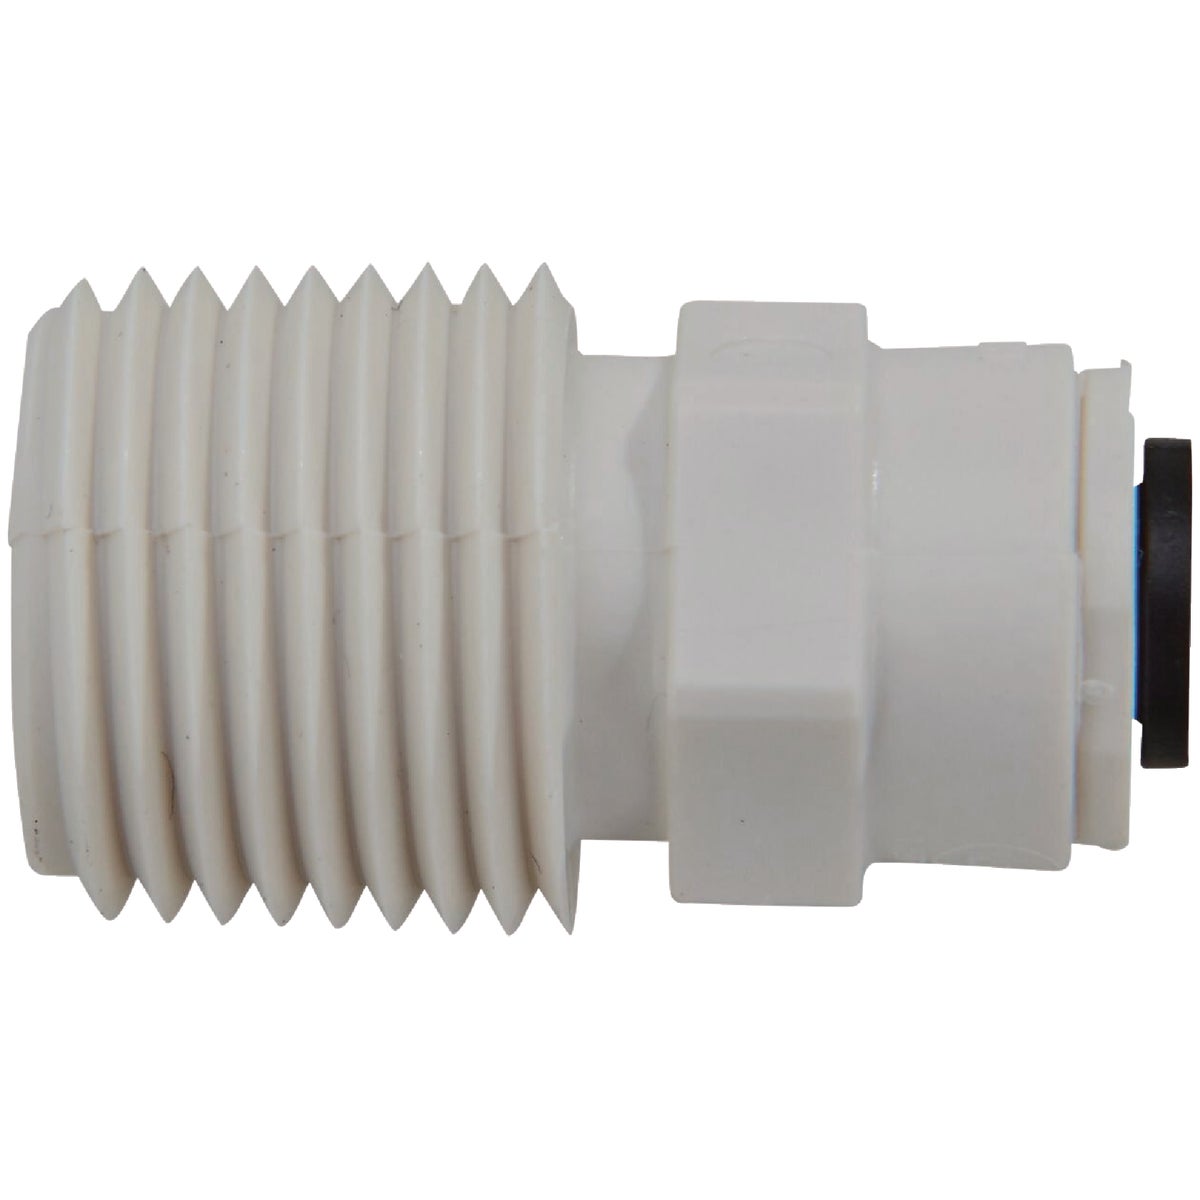 Watts Aqualock 1/4 In. OD x 1/2 In. MPT Push-to-Connect Plastic Adapter